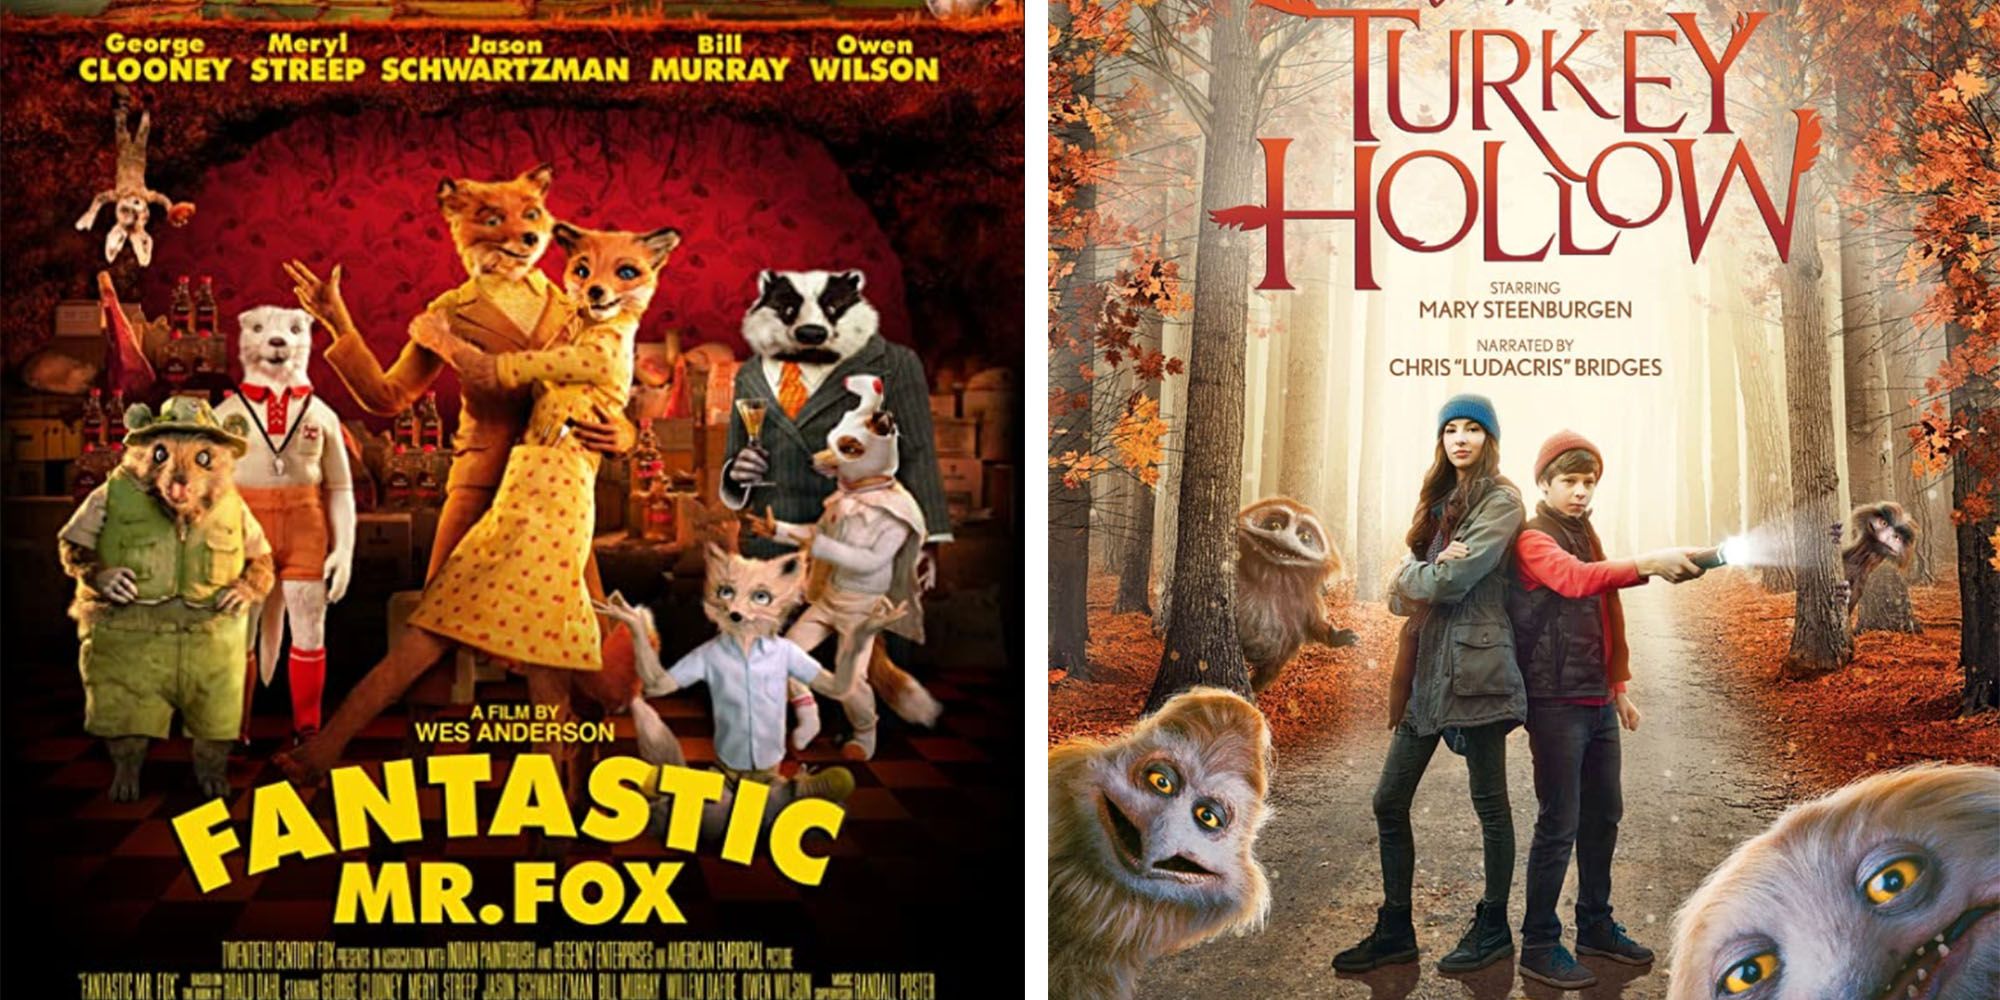 22 Best Thanksgiving Movies for Kids - Movies to Watch on Thanksgiving 2021